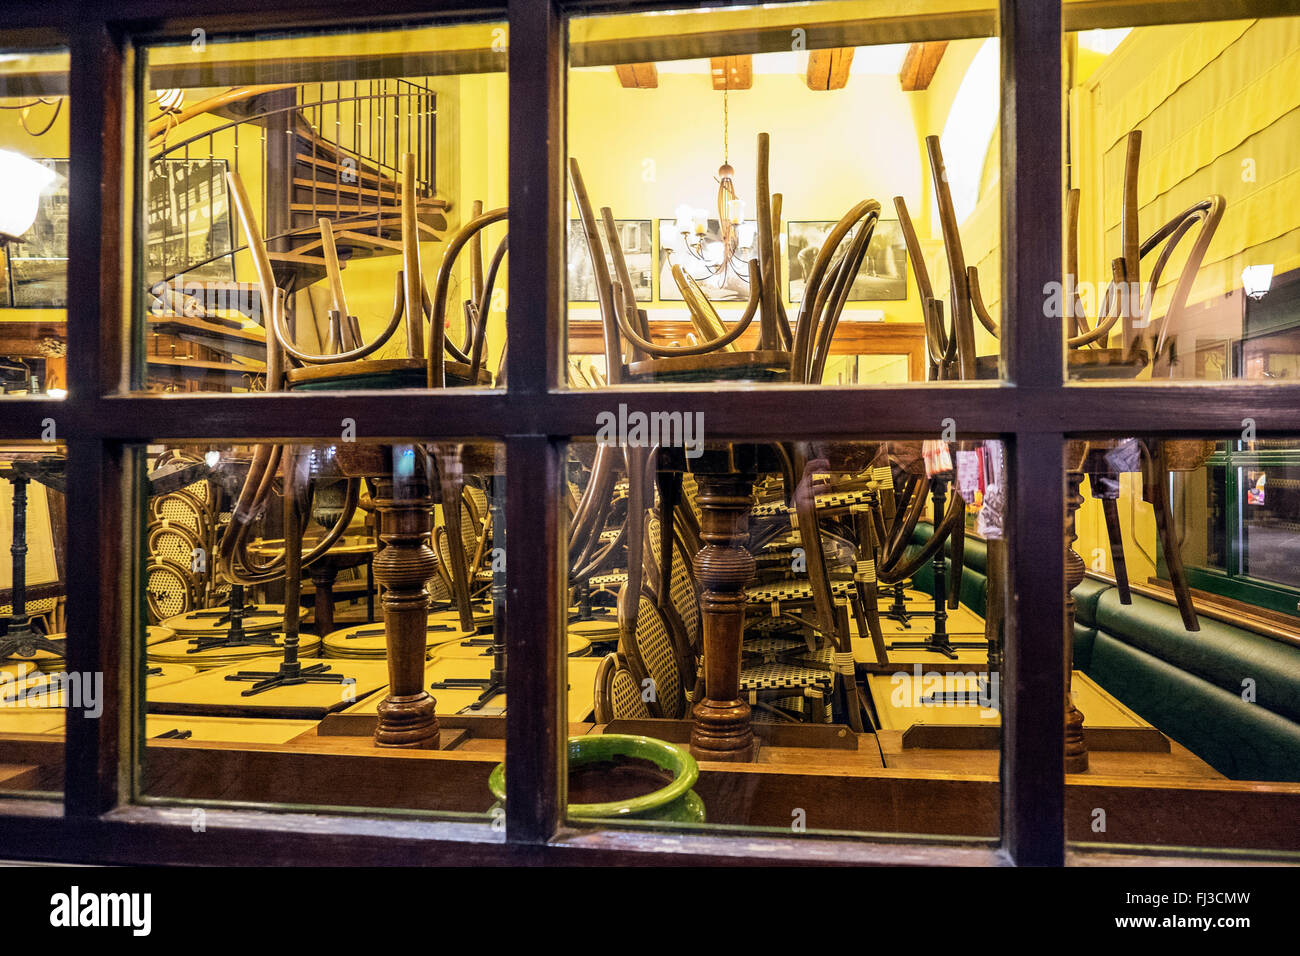 Chairs stacked on tables in closed café, Alsace, France, Europe Stock Photo